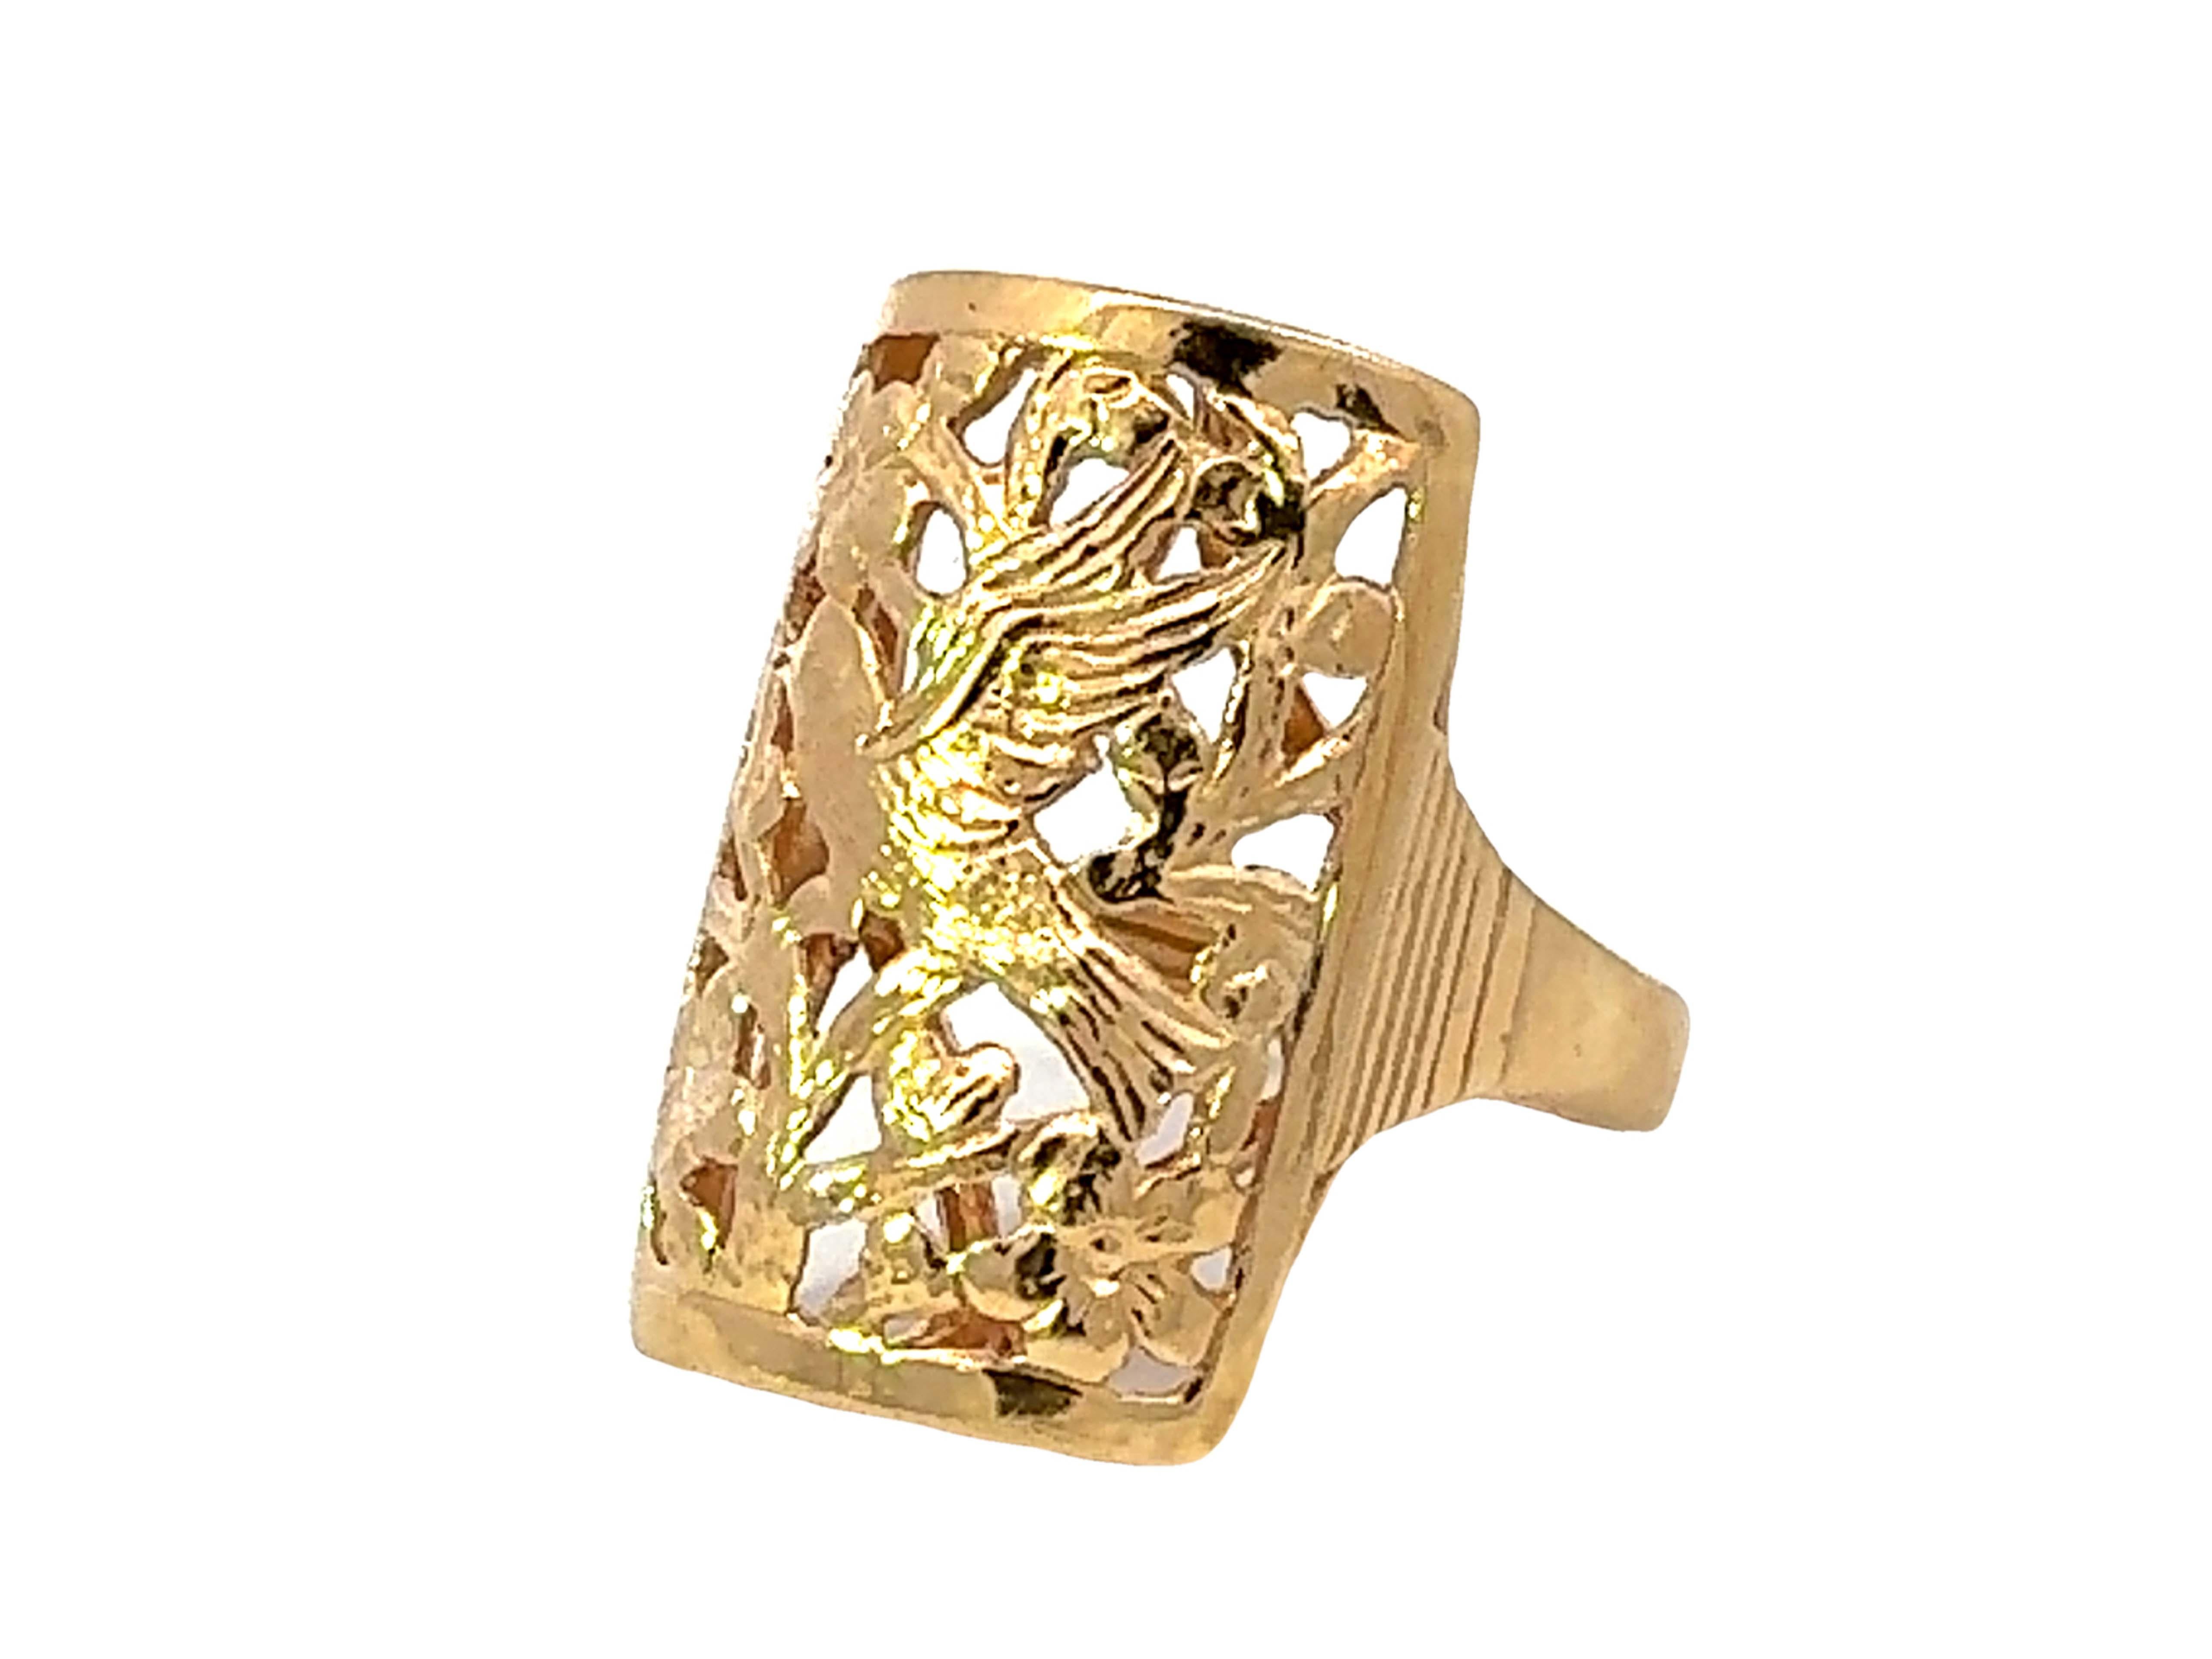 Mings Bird on a Plum Rectangular Gold Cutout Ring 14k Yellow Gold In Excellent Condition For Sale In Honolulu, HI